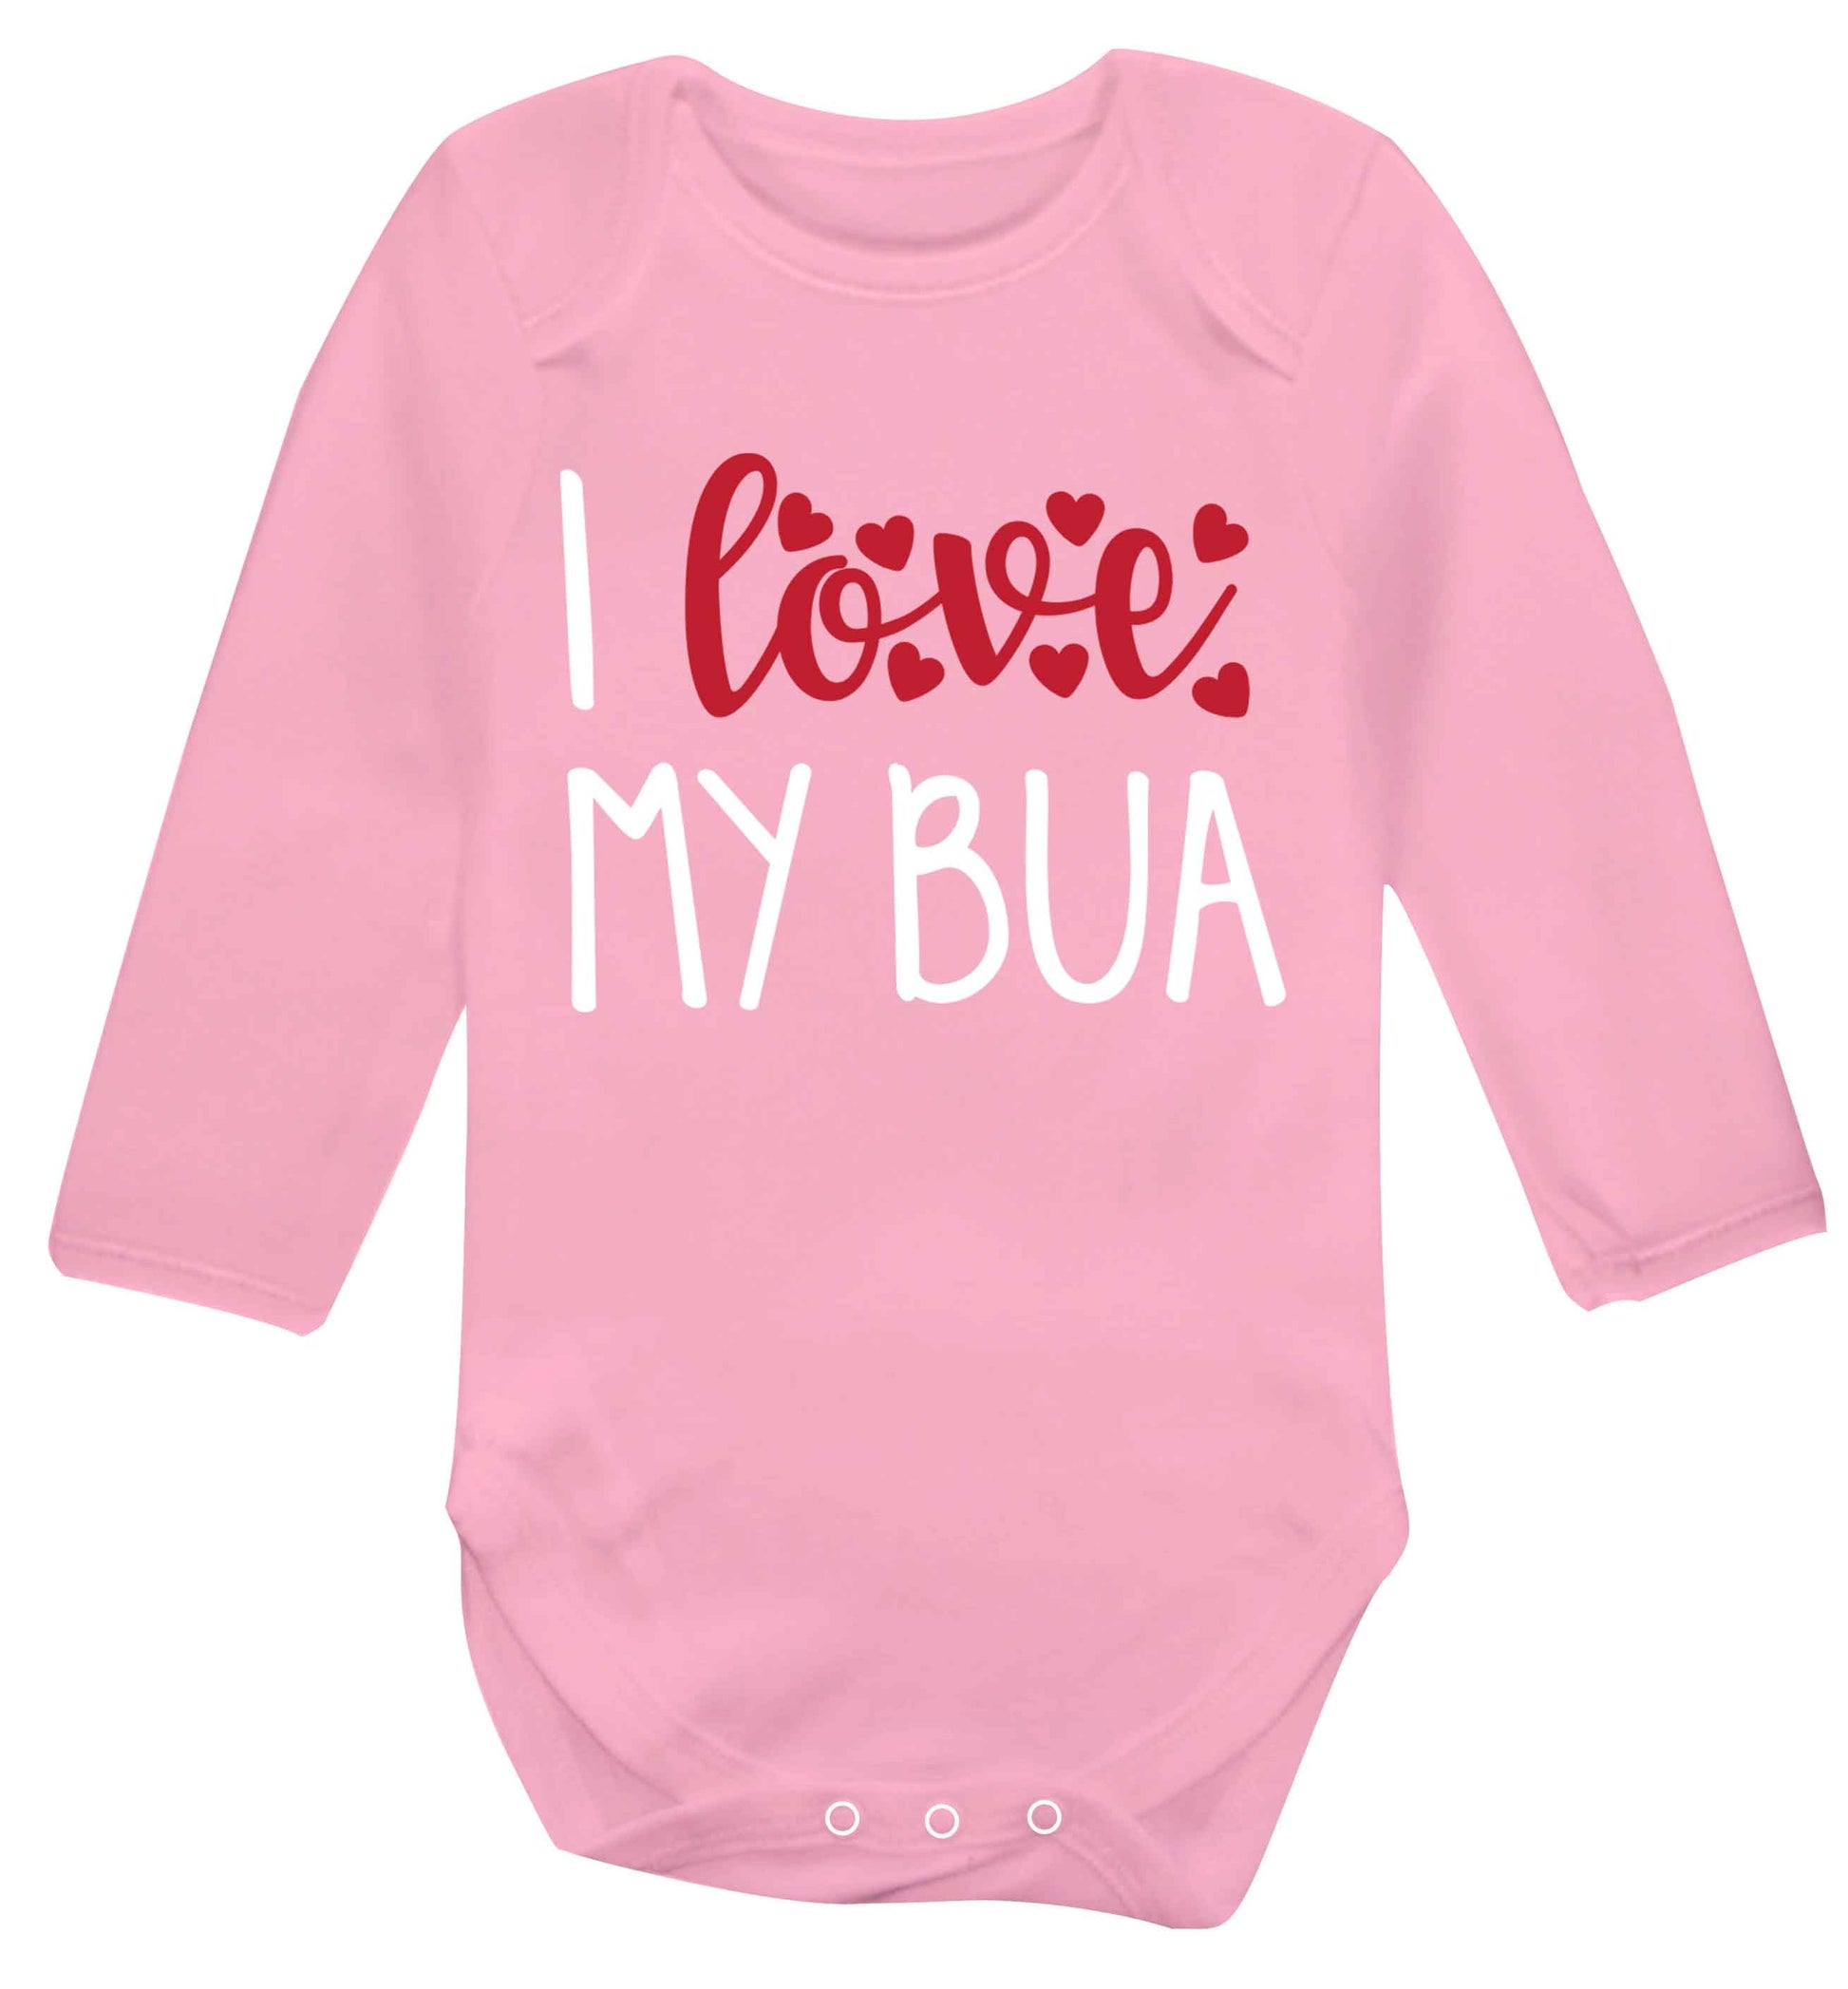 I love my bua Baby Vest long sleeved pale pink 6-12 months